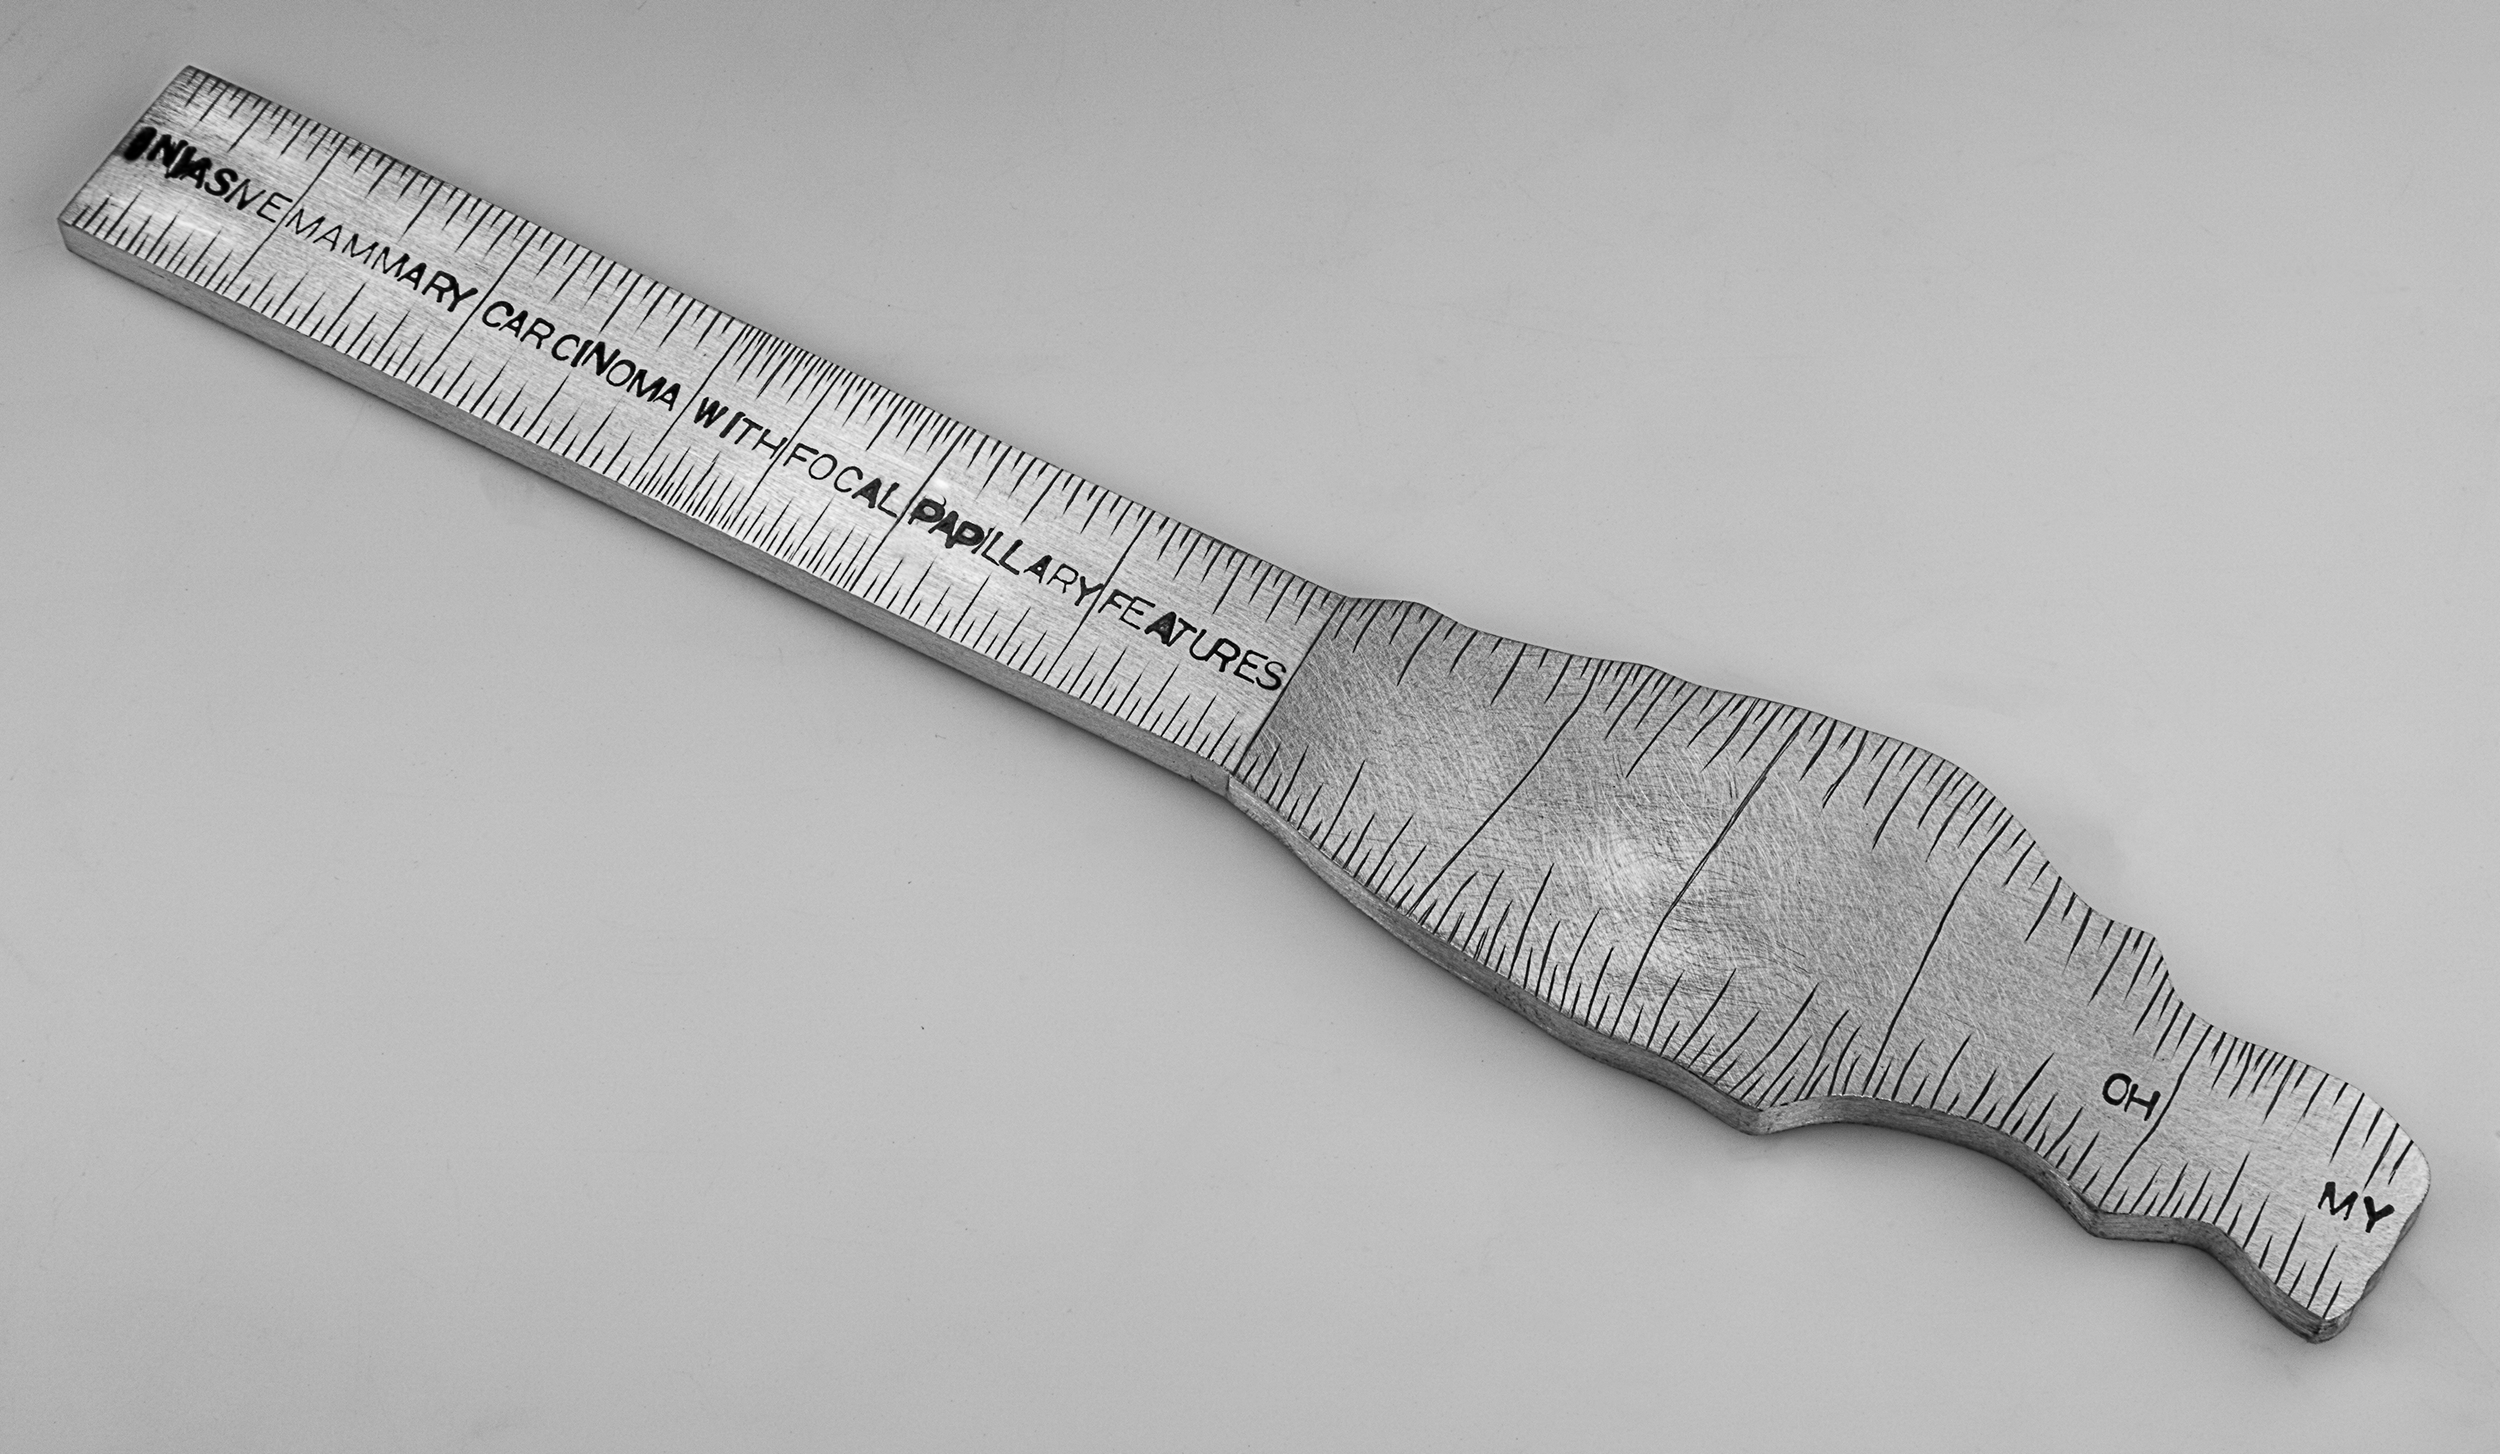 Instrument #172, hand engraved aluminum and ink, 10.875" x 1.875" x .25"